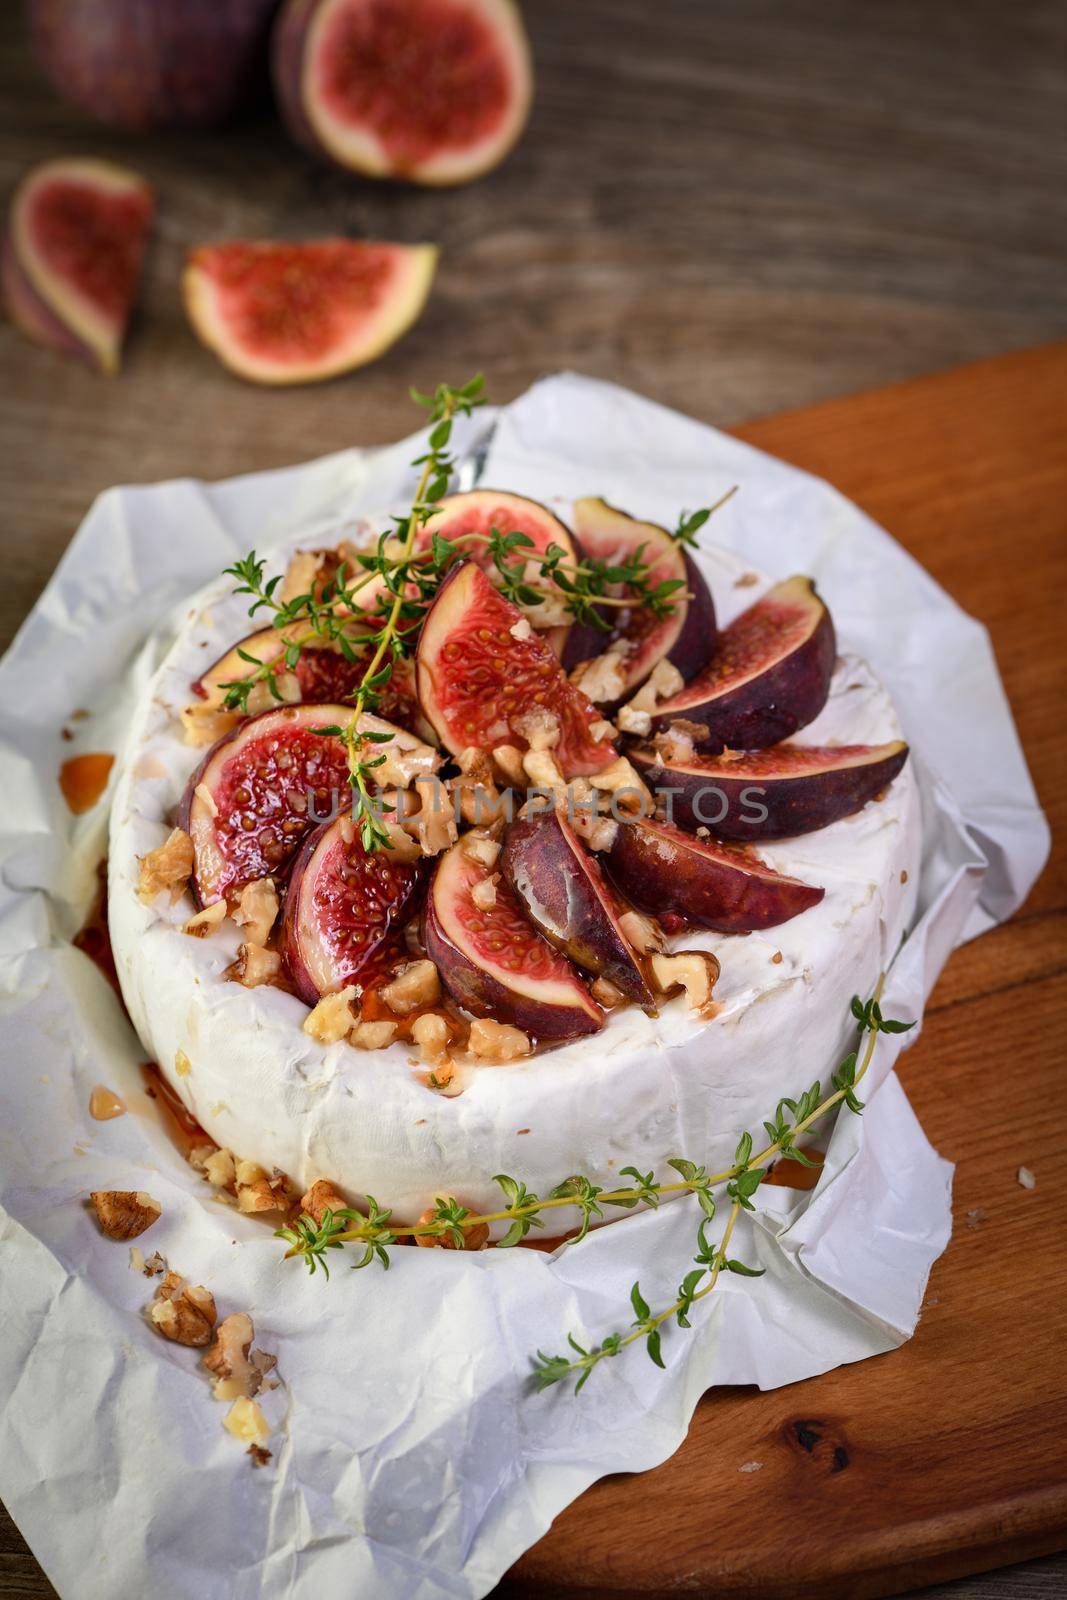 Brie cheese with honey and figs by Apolonia